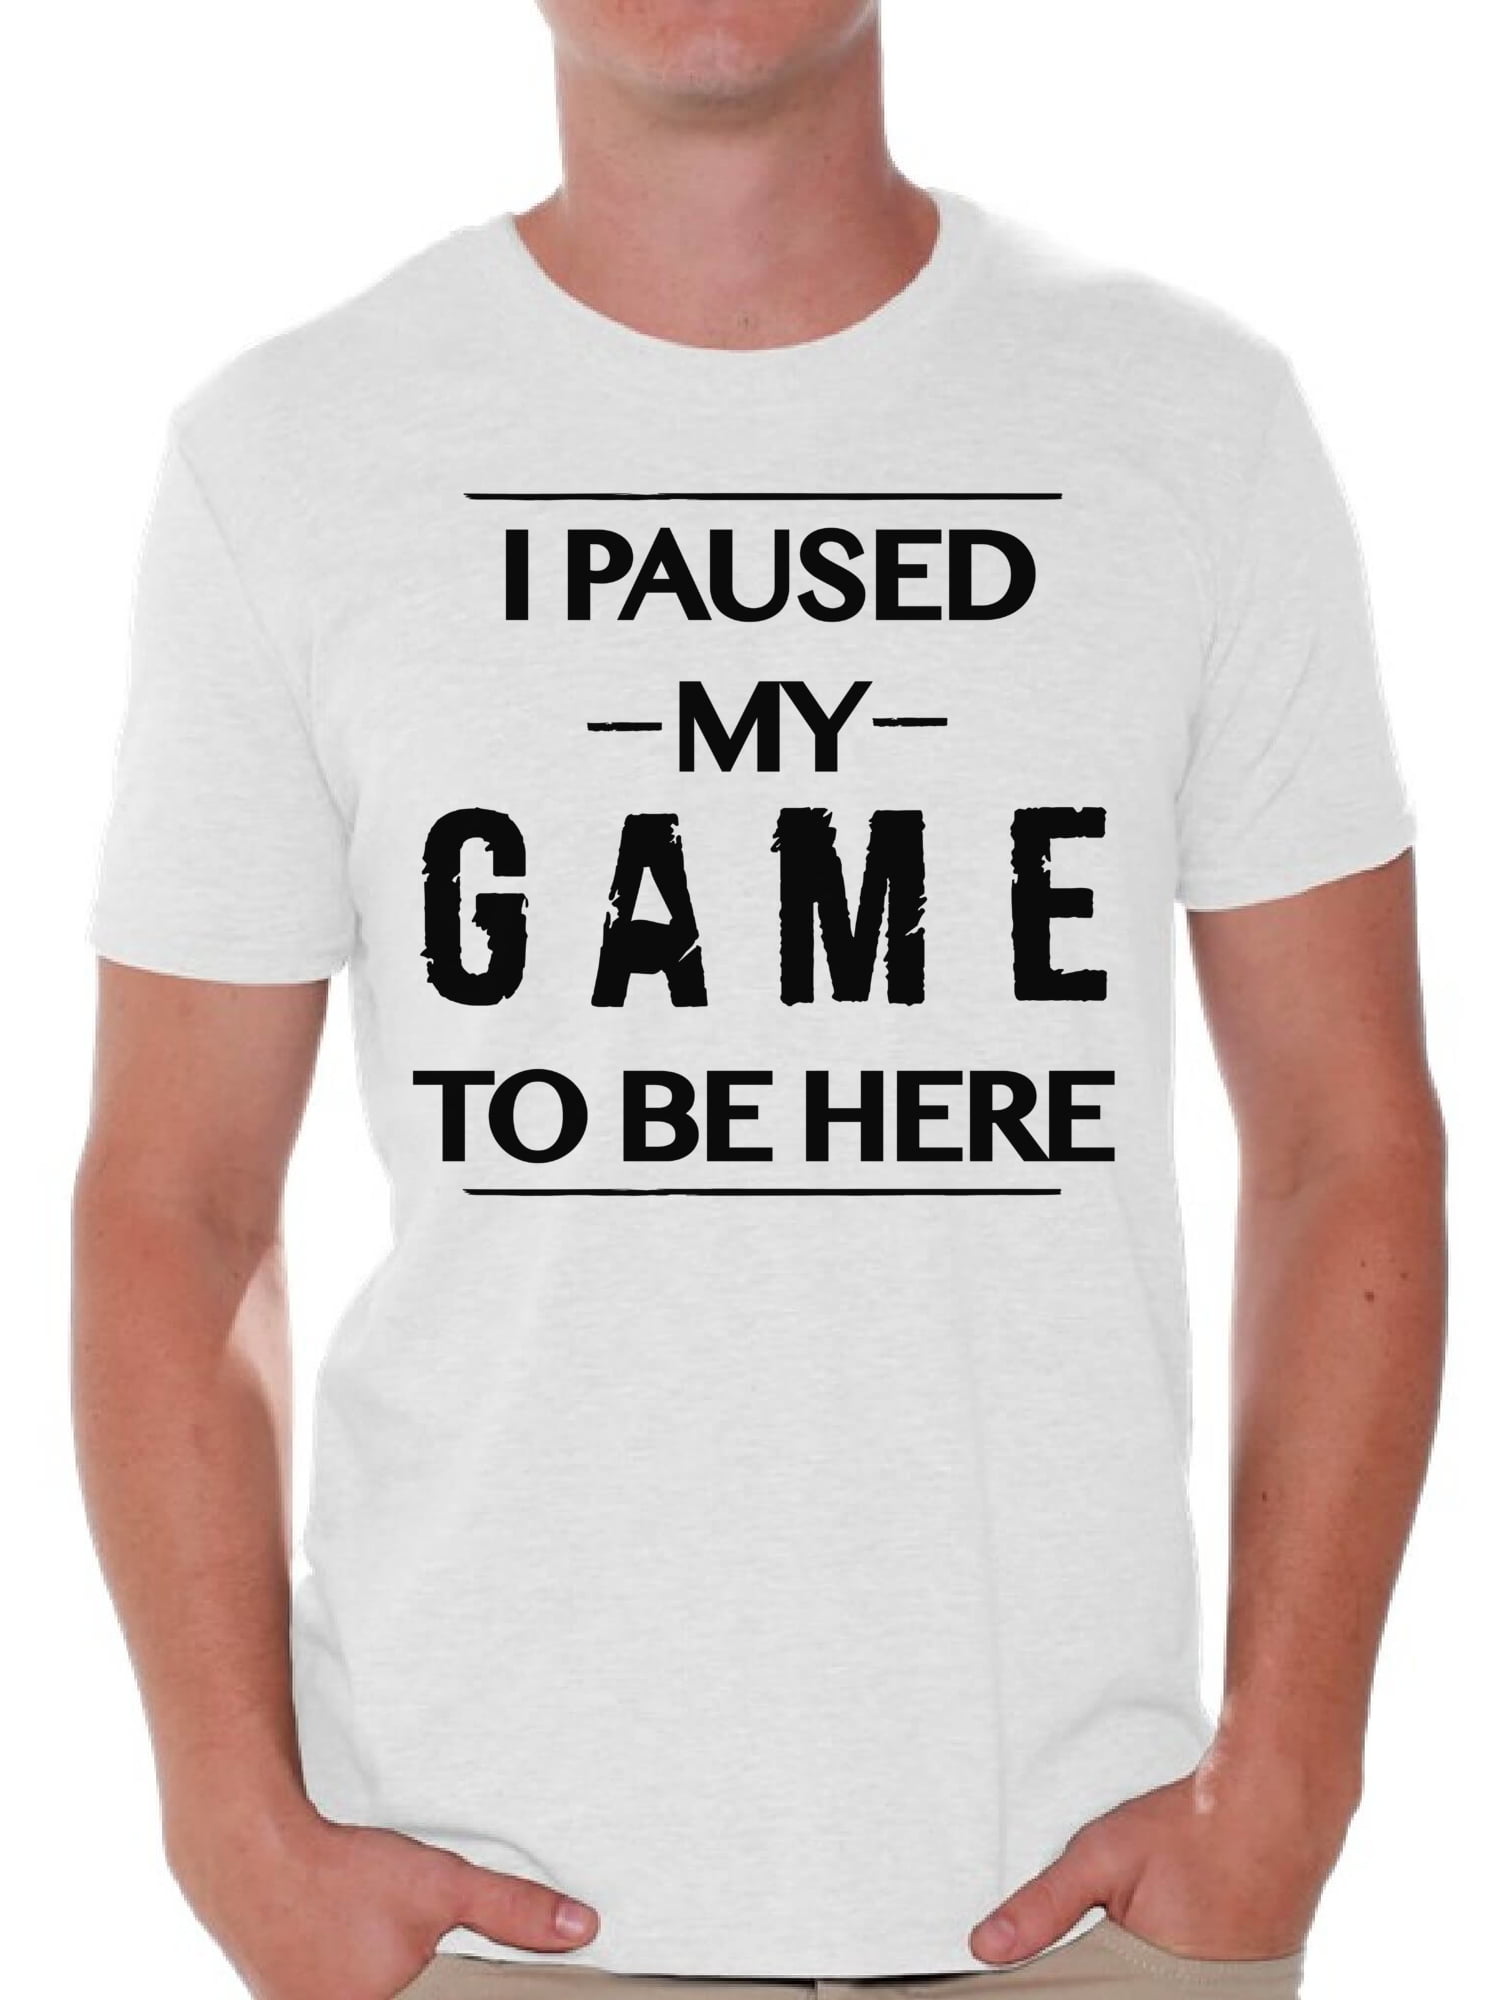 Gamer T Shirt Funny Graphic Tees for Men I Paused My Game To Be Here ...